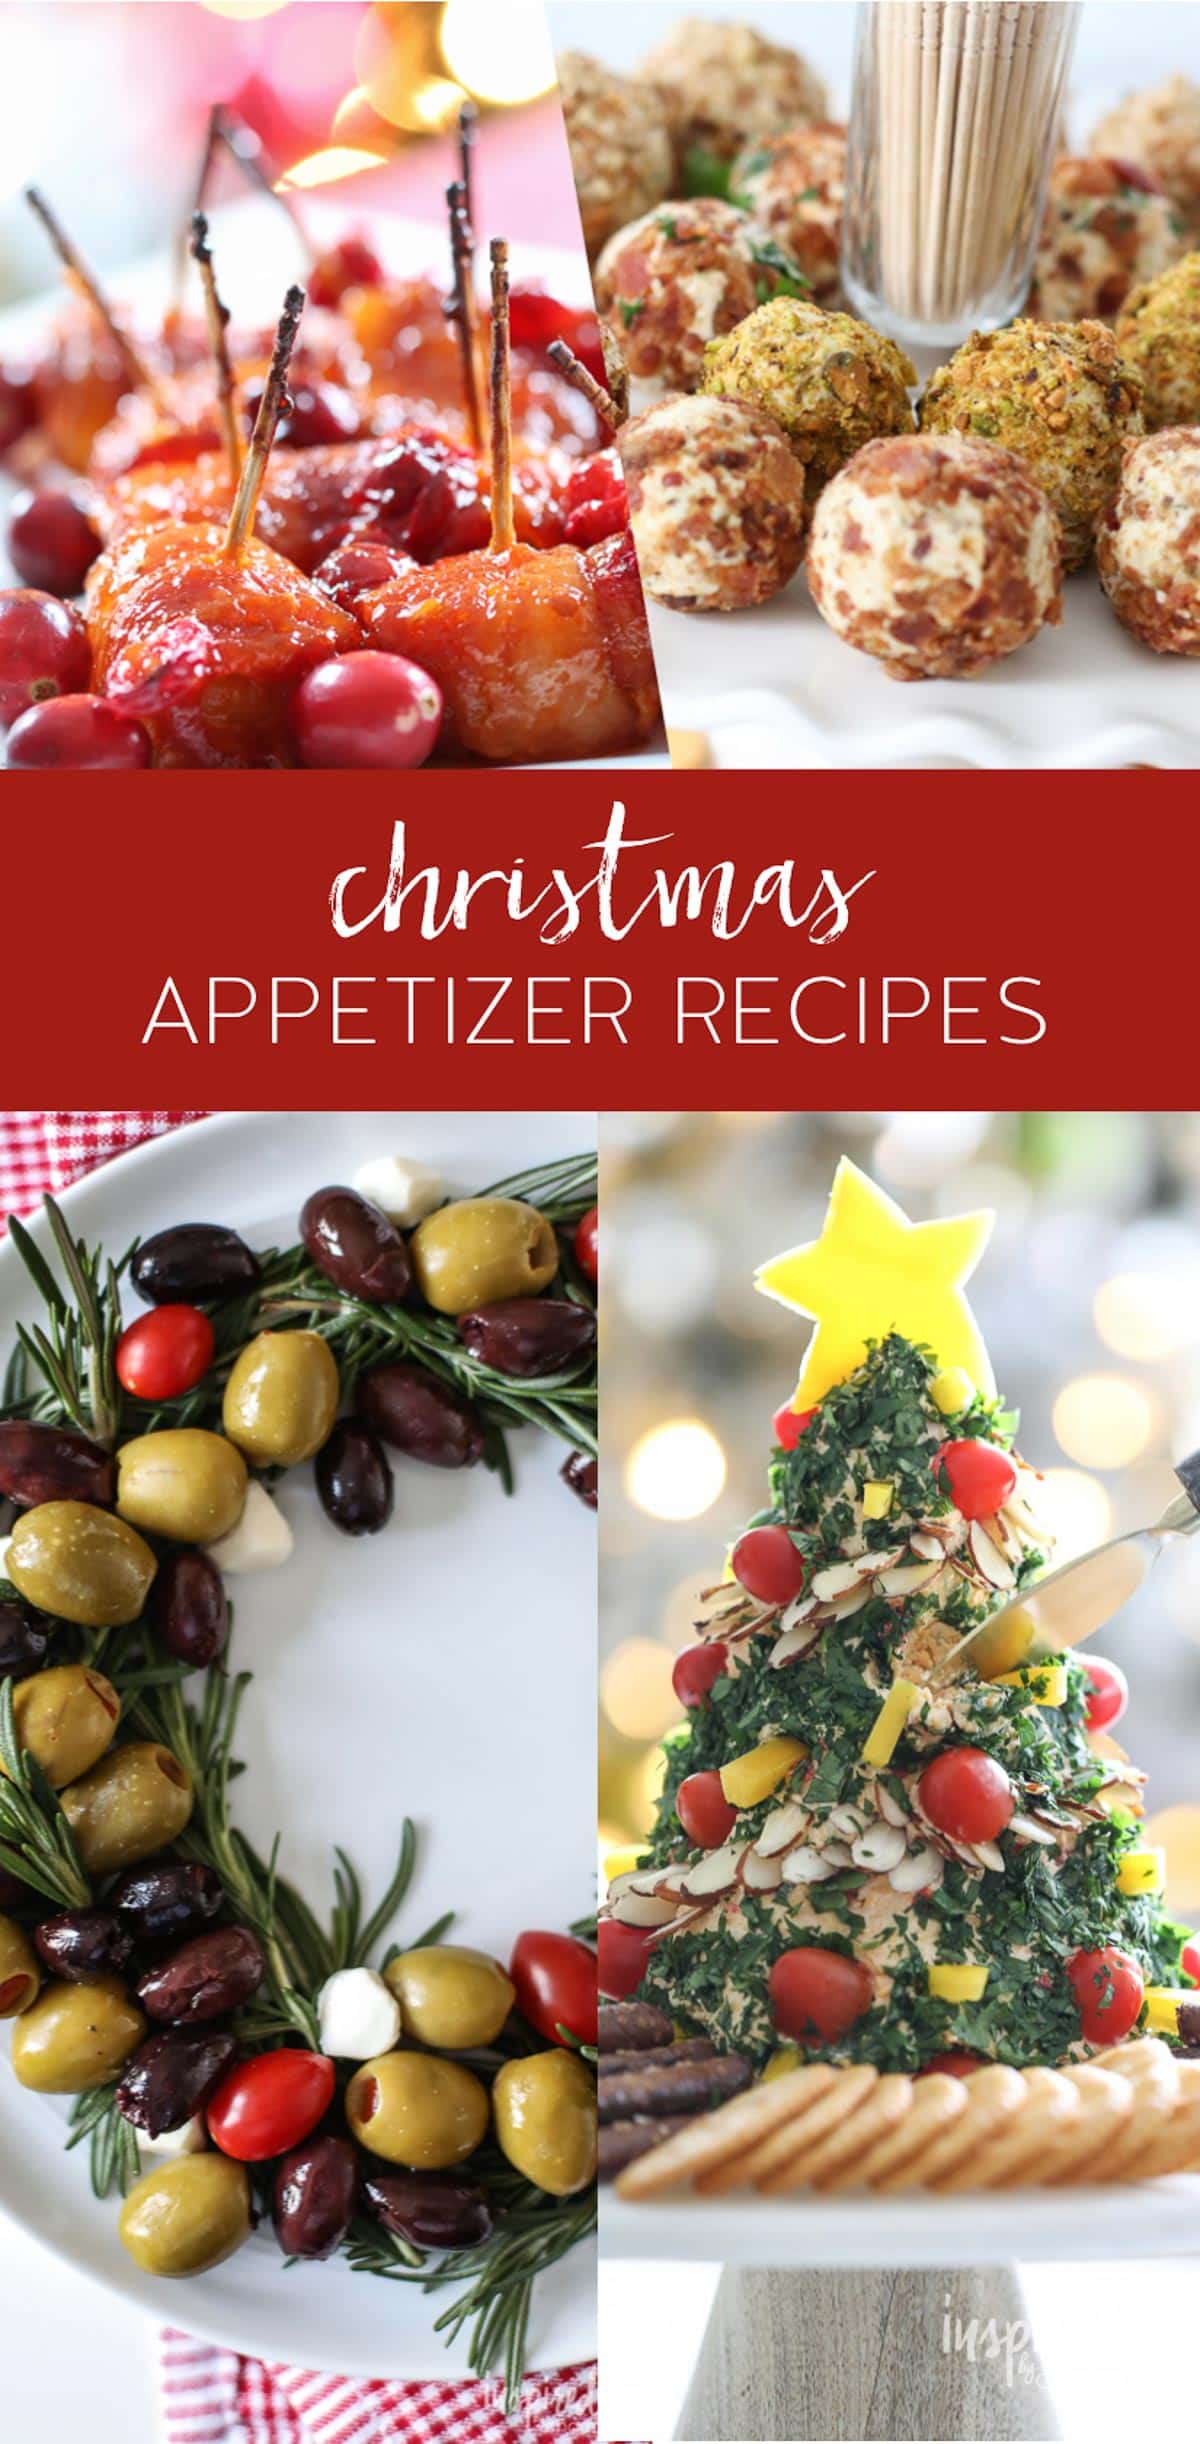 The Best Christmas Appetizer Recipes #christmas #holiday #appetizer #recipe #recipes #entertaining